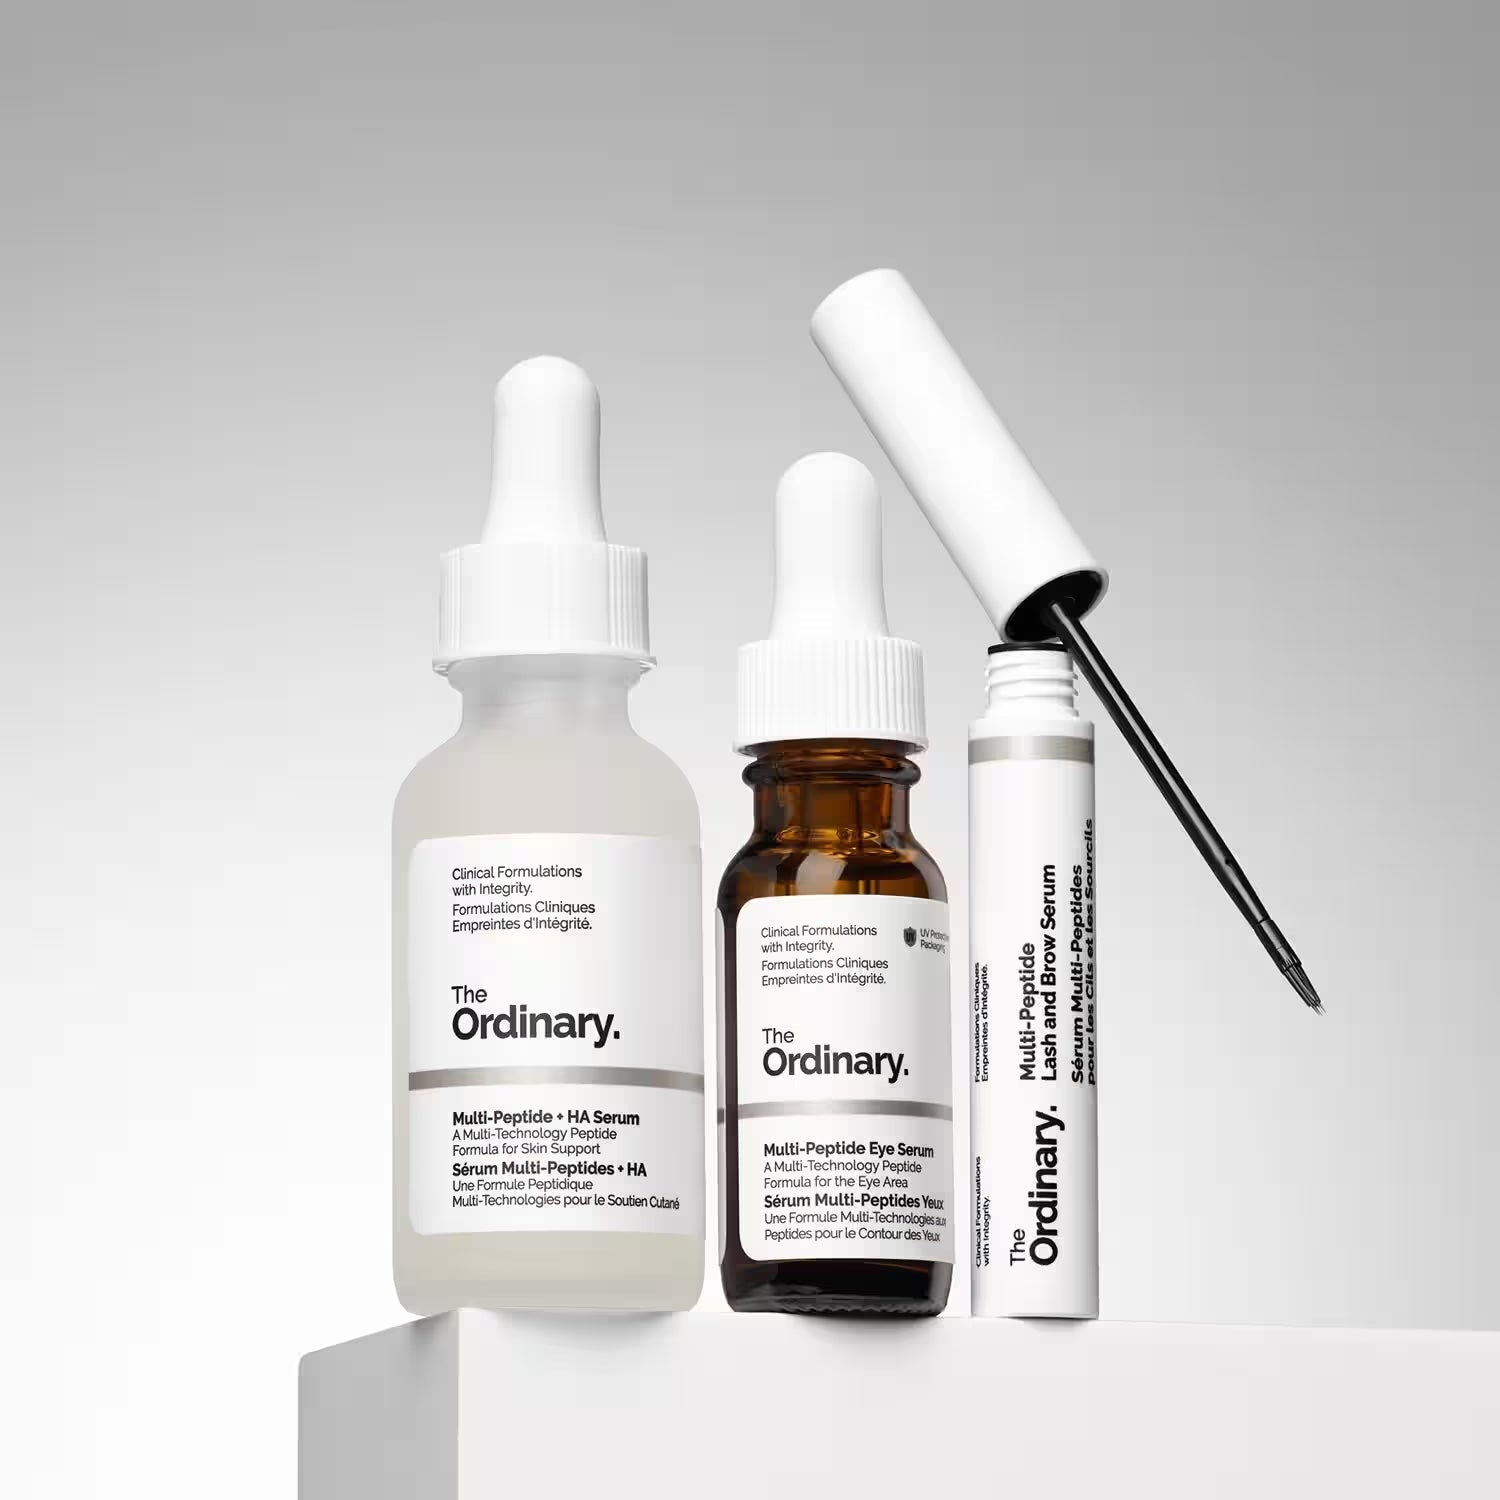 The Ordinary - The Power of Peptides Set